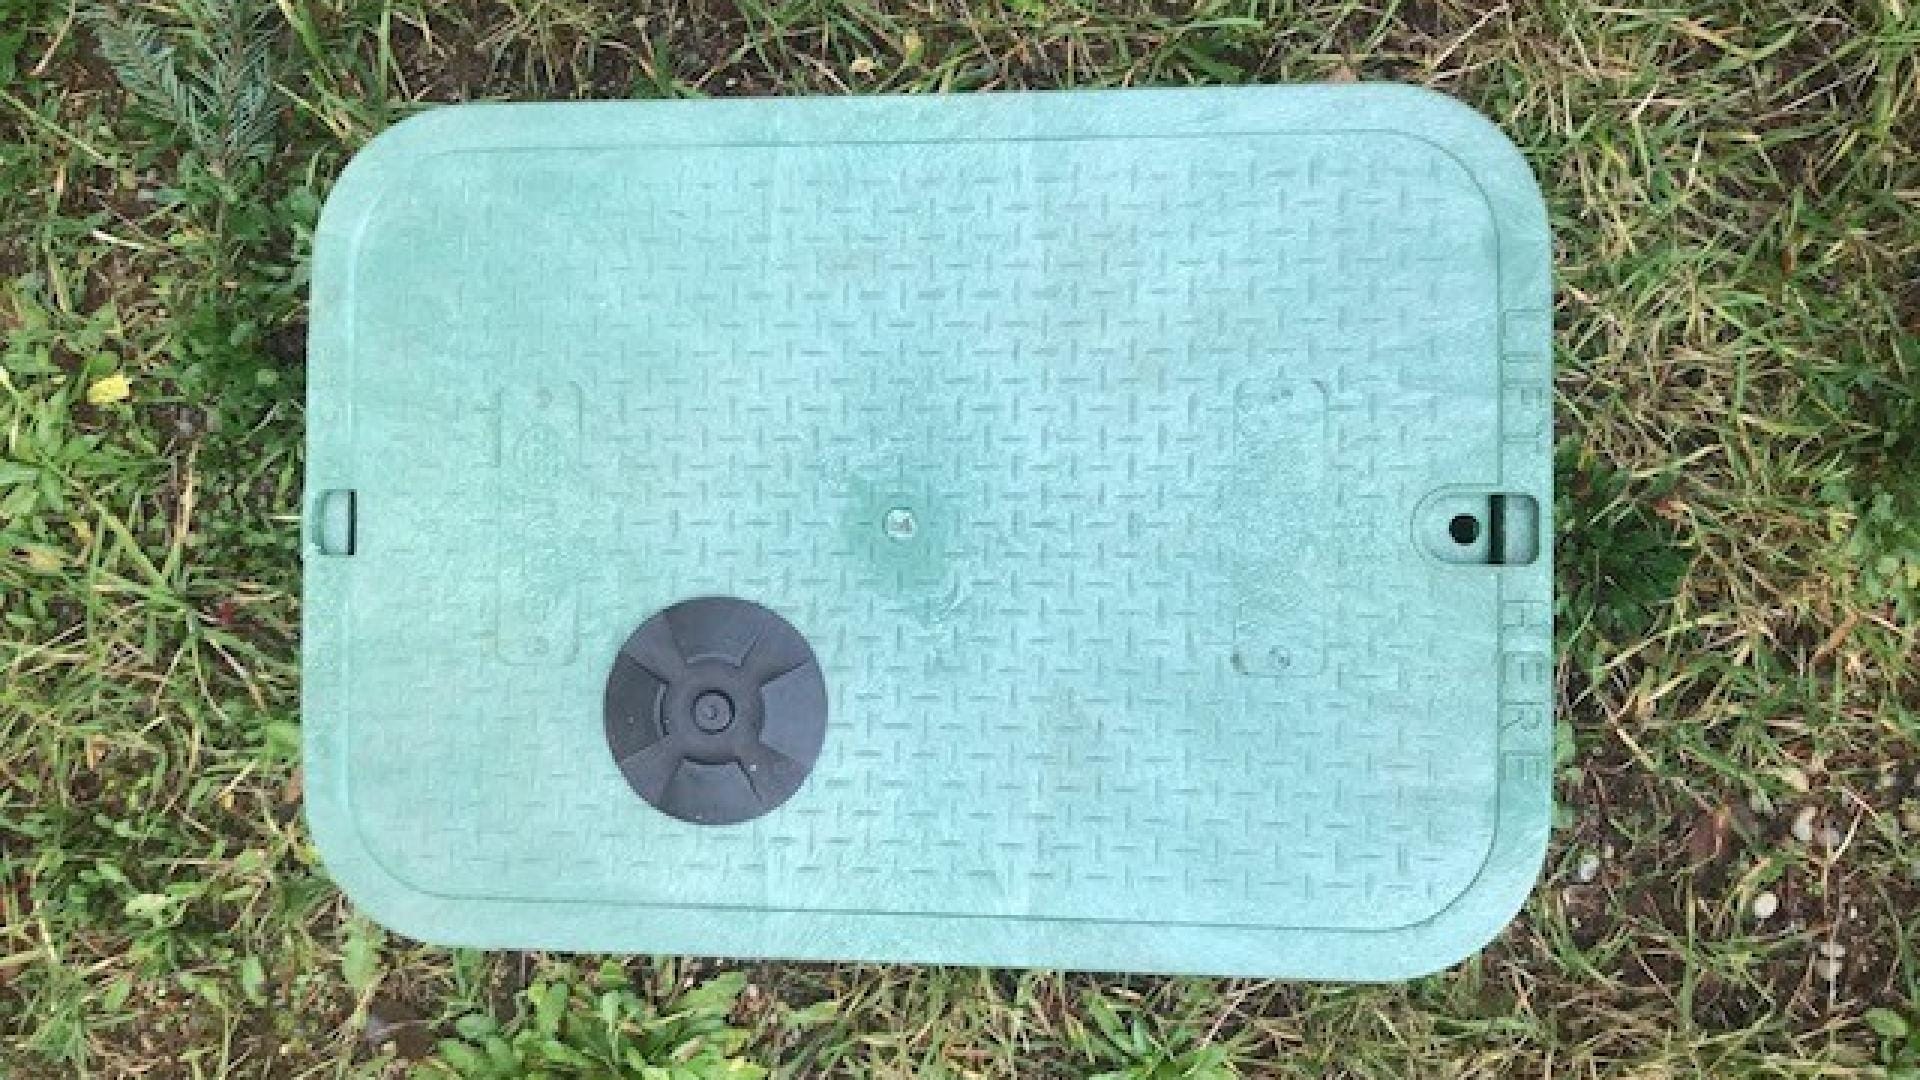 Greenish water meter box on ground. The water meter box is surrounded by grass.